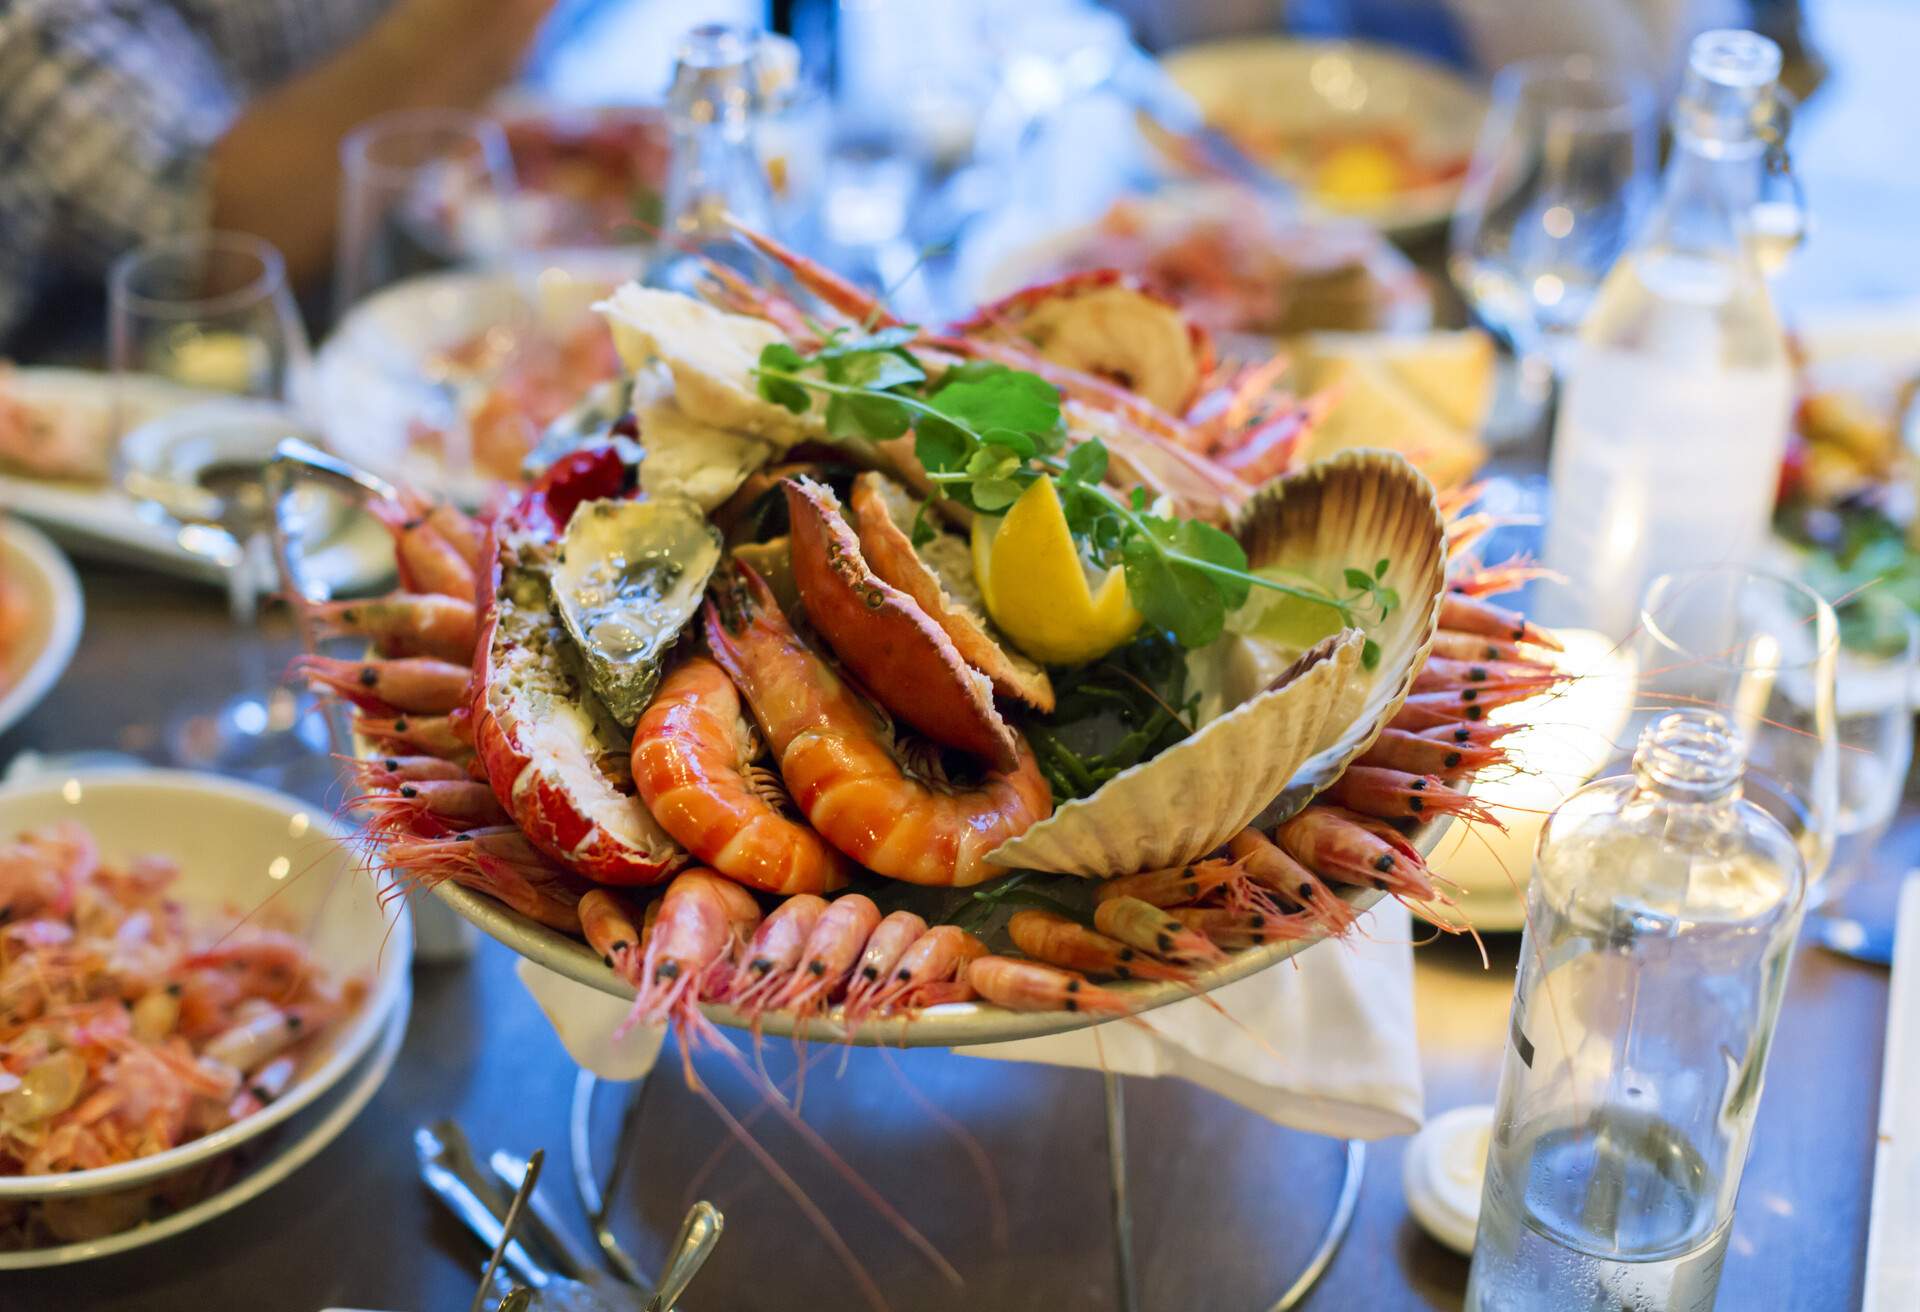 dest_norway_theme_food_seafood_norwegian_gettyimages-1248929638_universal_within-usage-period_82909